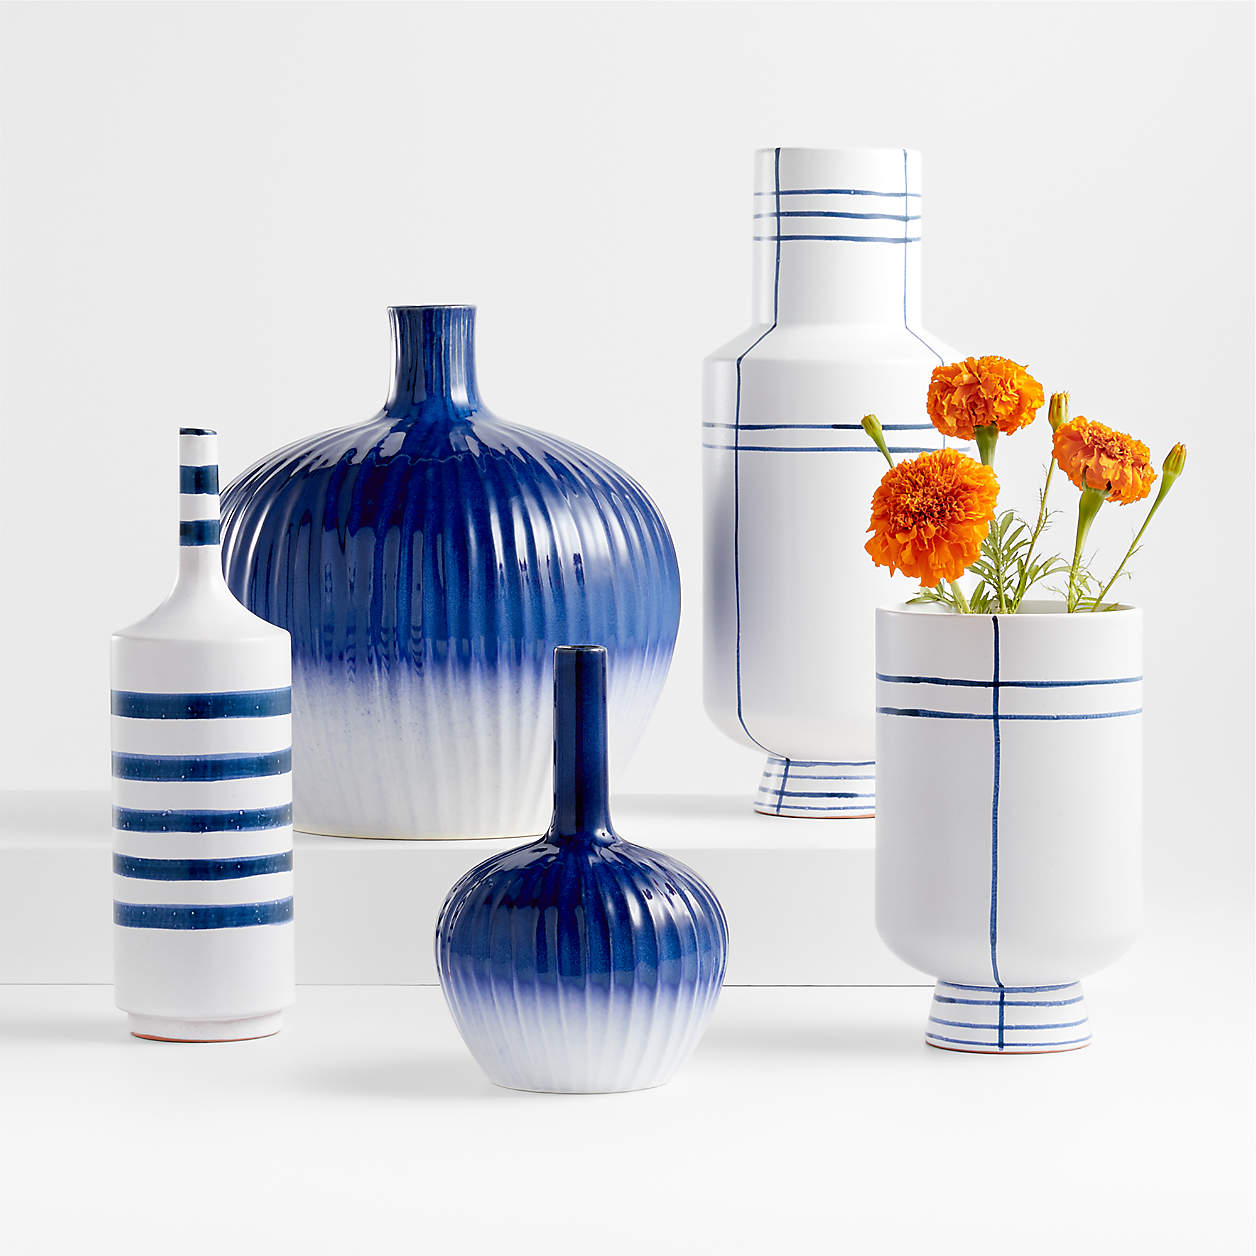 Crate and Barrel Vases, by lifestyle blogger What The Fab